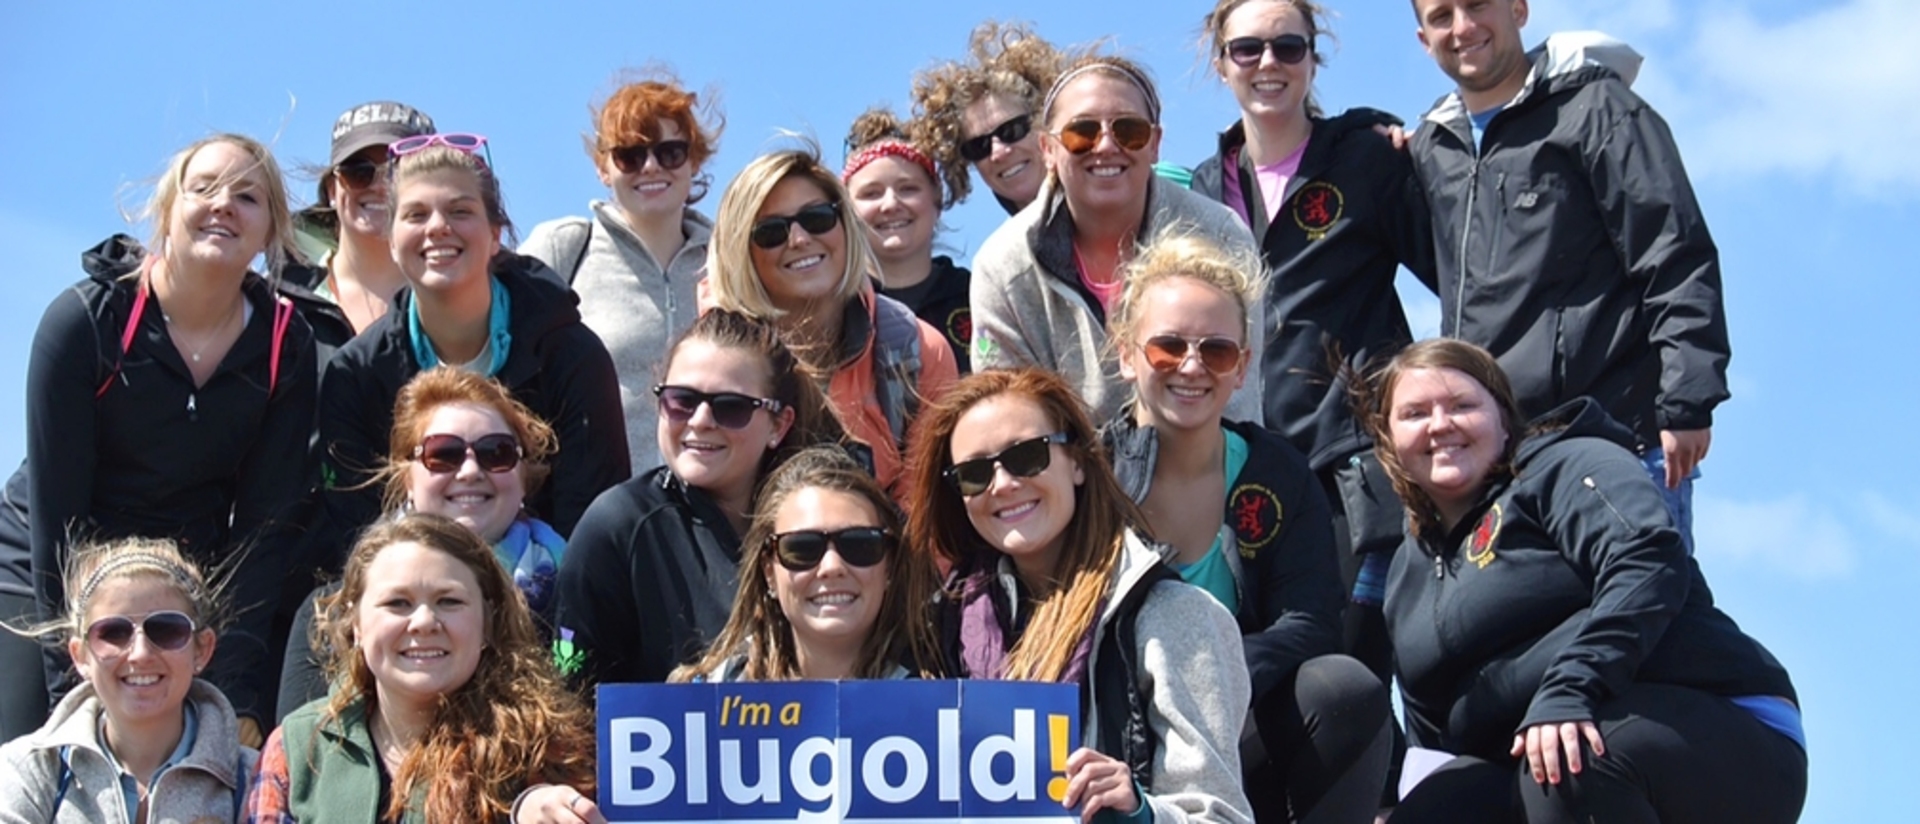 Students holding a Blugold sign